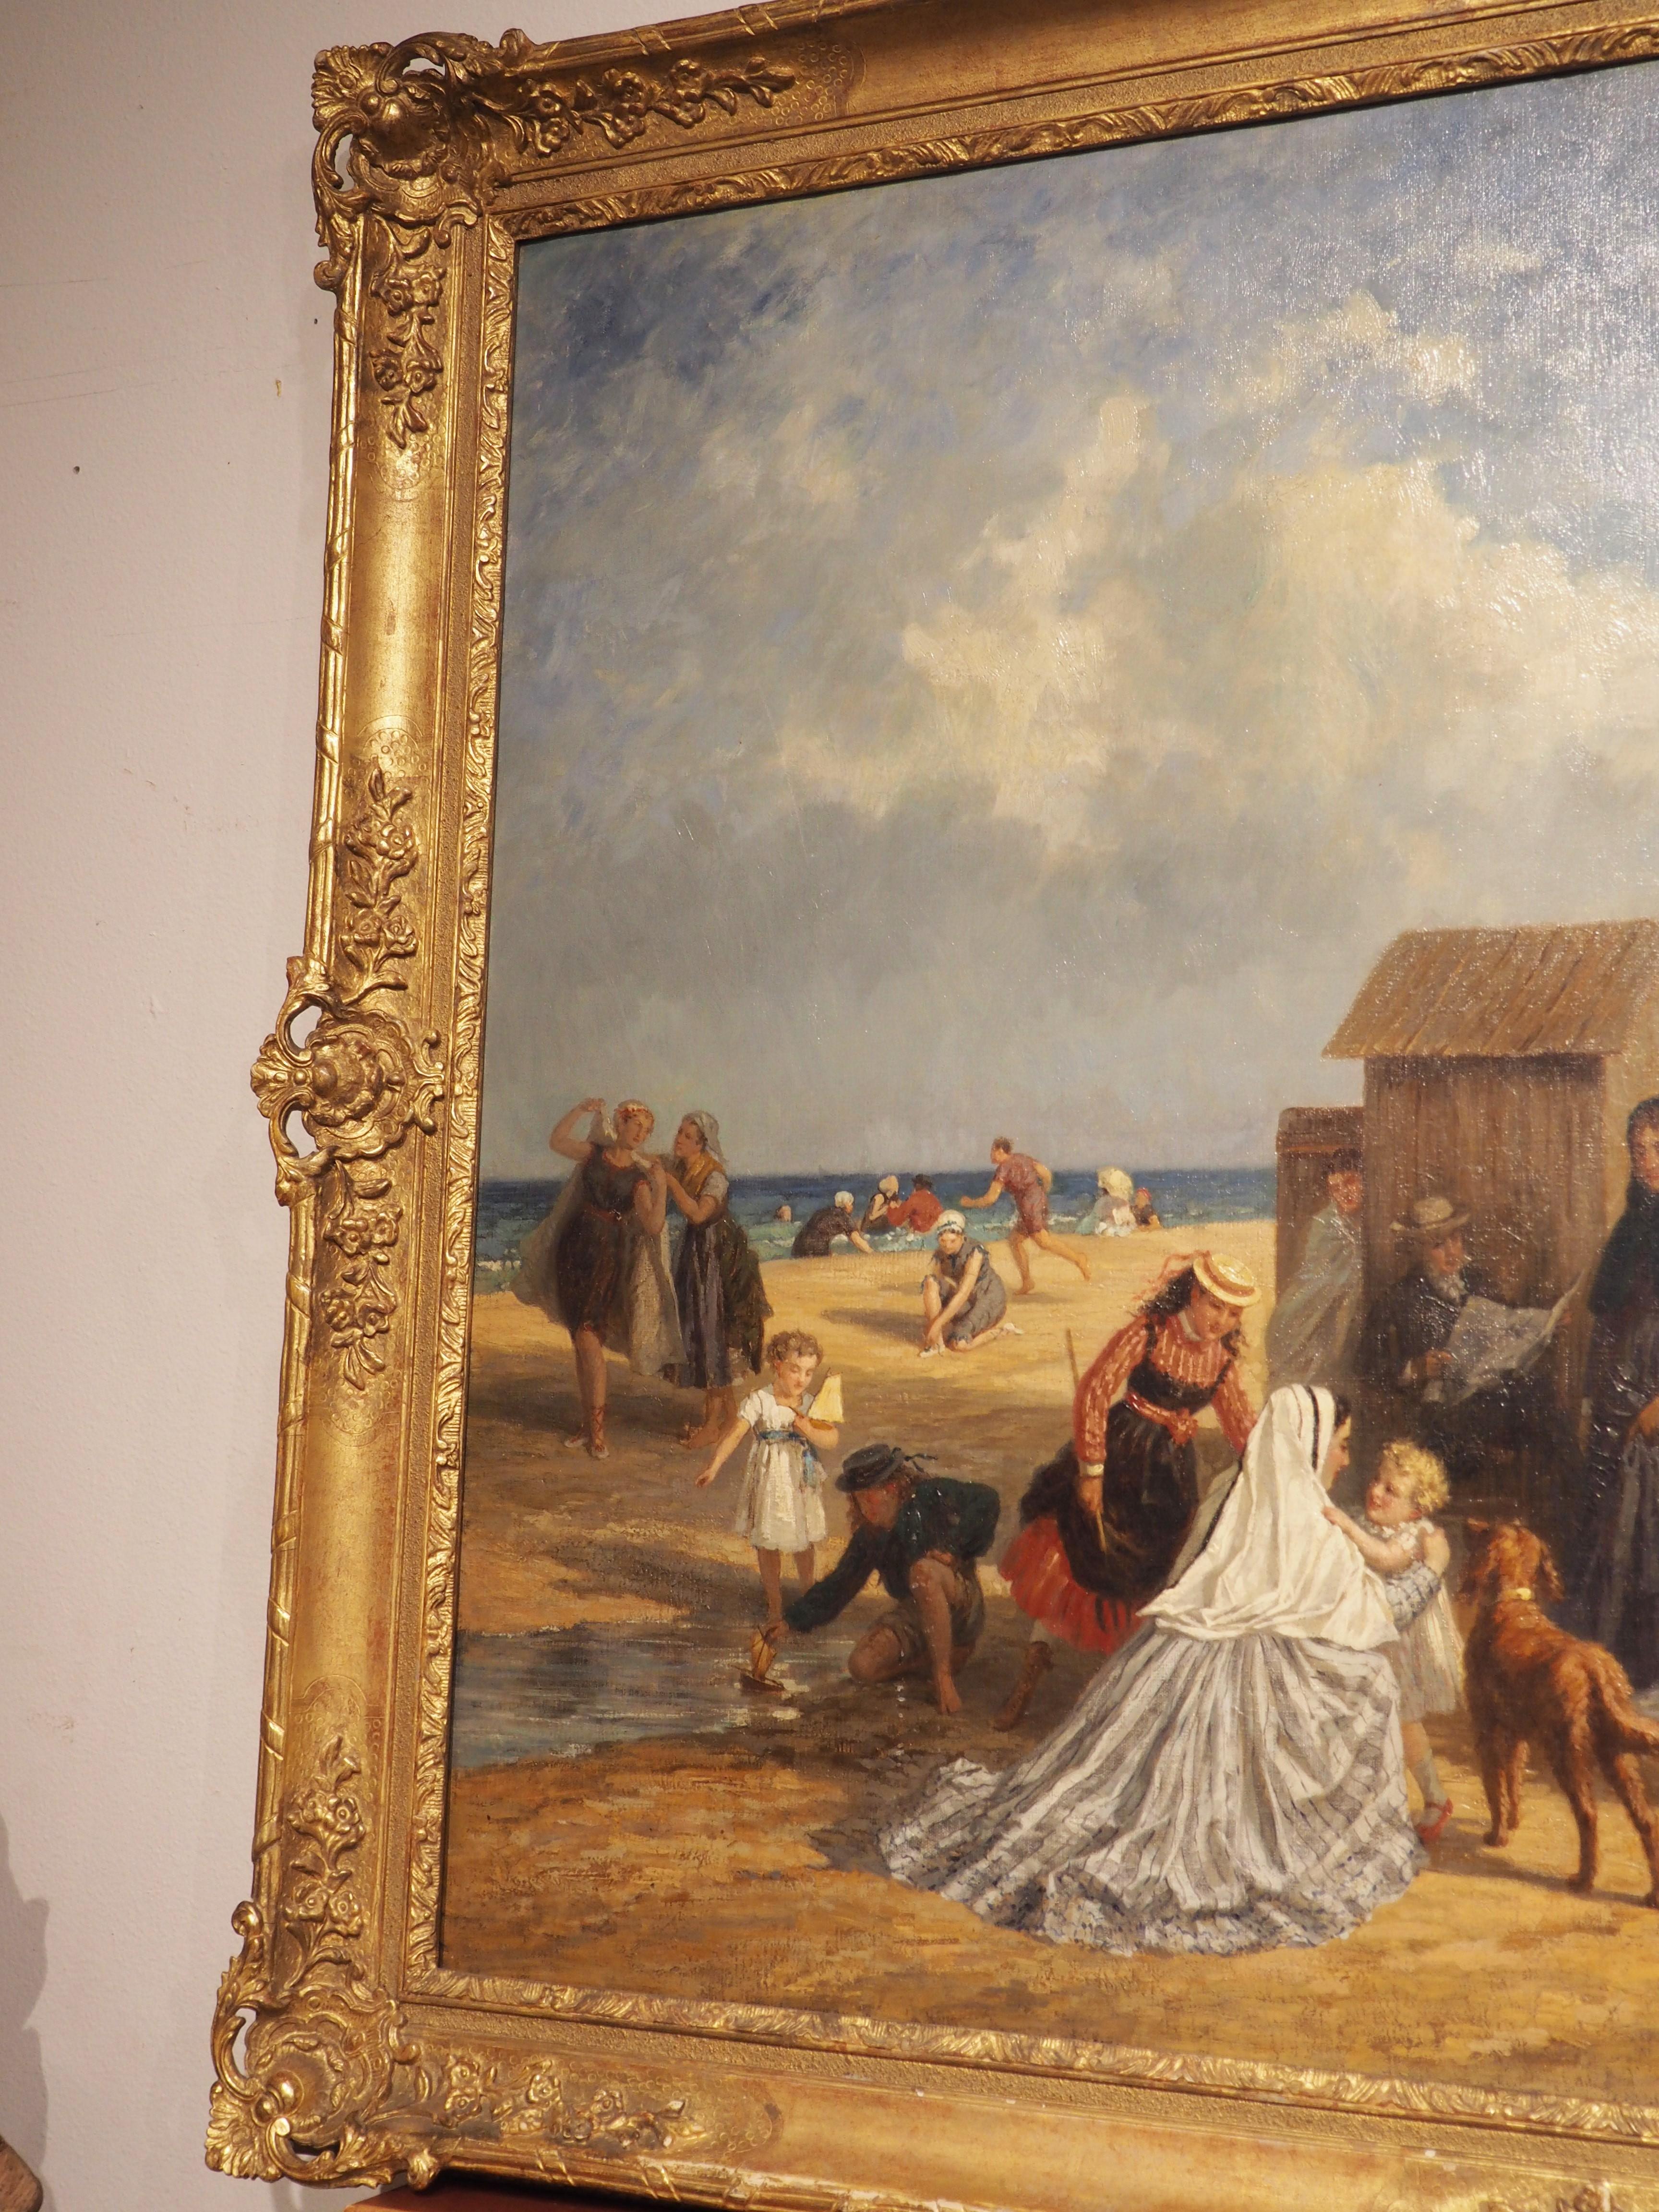 A fantastic depiction of a day at the beach at Trouville in 19th century France, this grand oil on canvas painting by Paul-Emile Morlon is is surrounded by a giltwood frame adorned with carvings of floral margents, Rococo-style foliage, and bundled